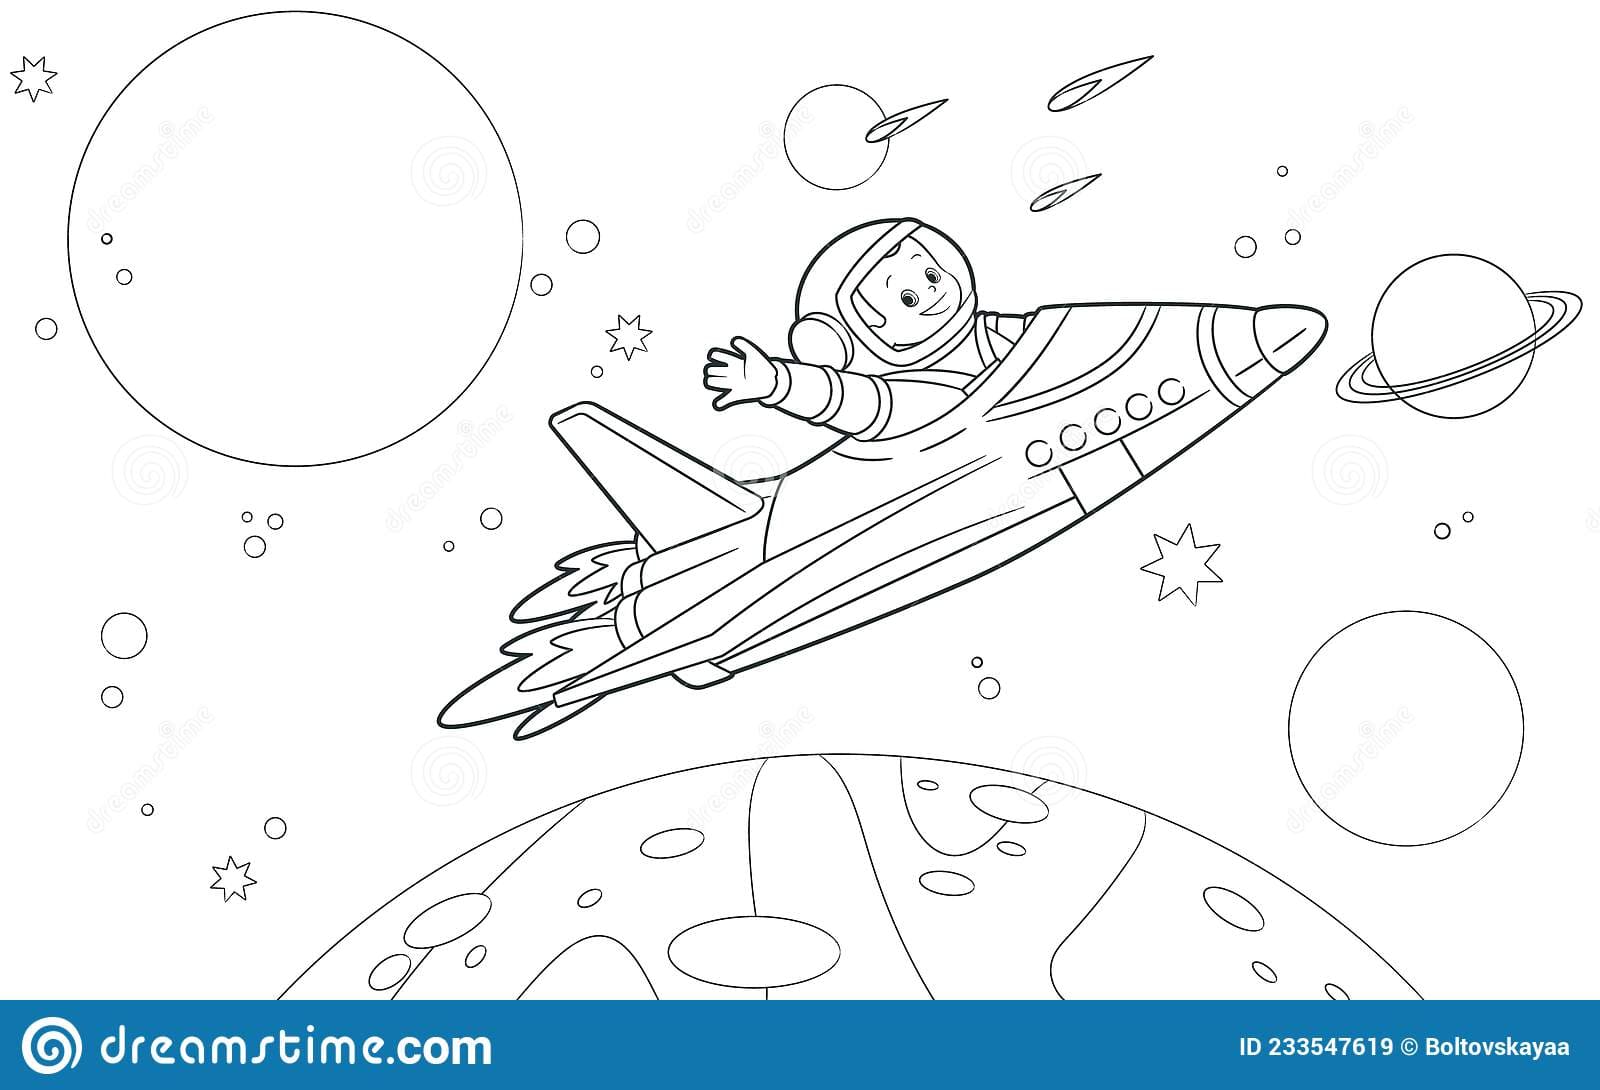 An astronaut flies on a shuttle among the planets